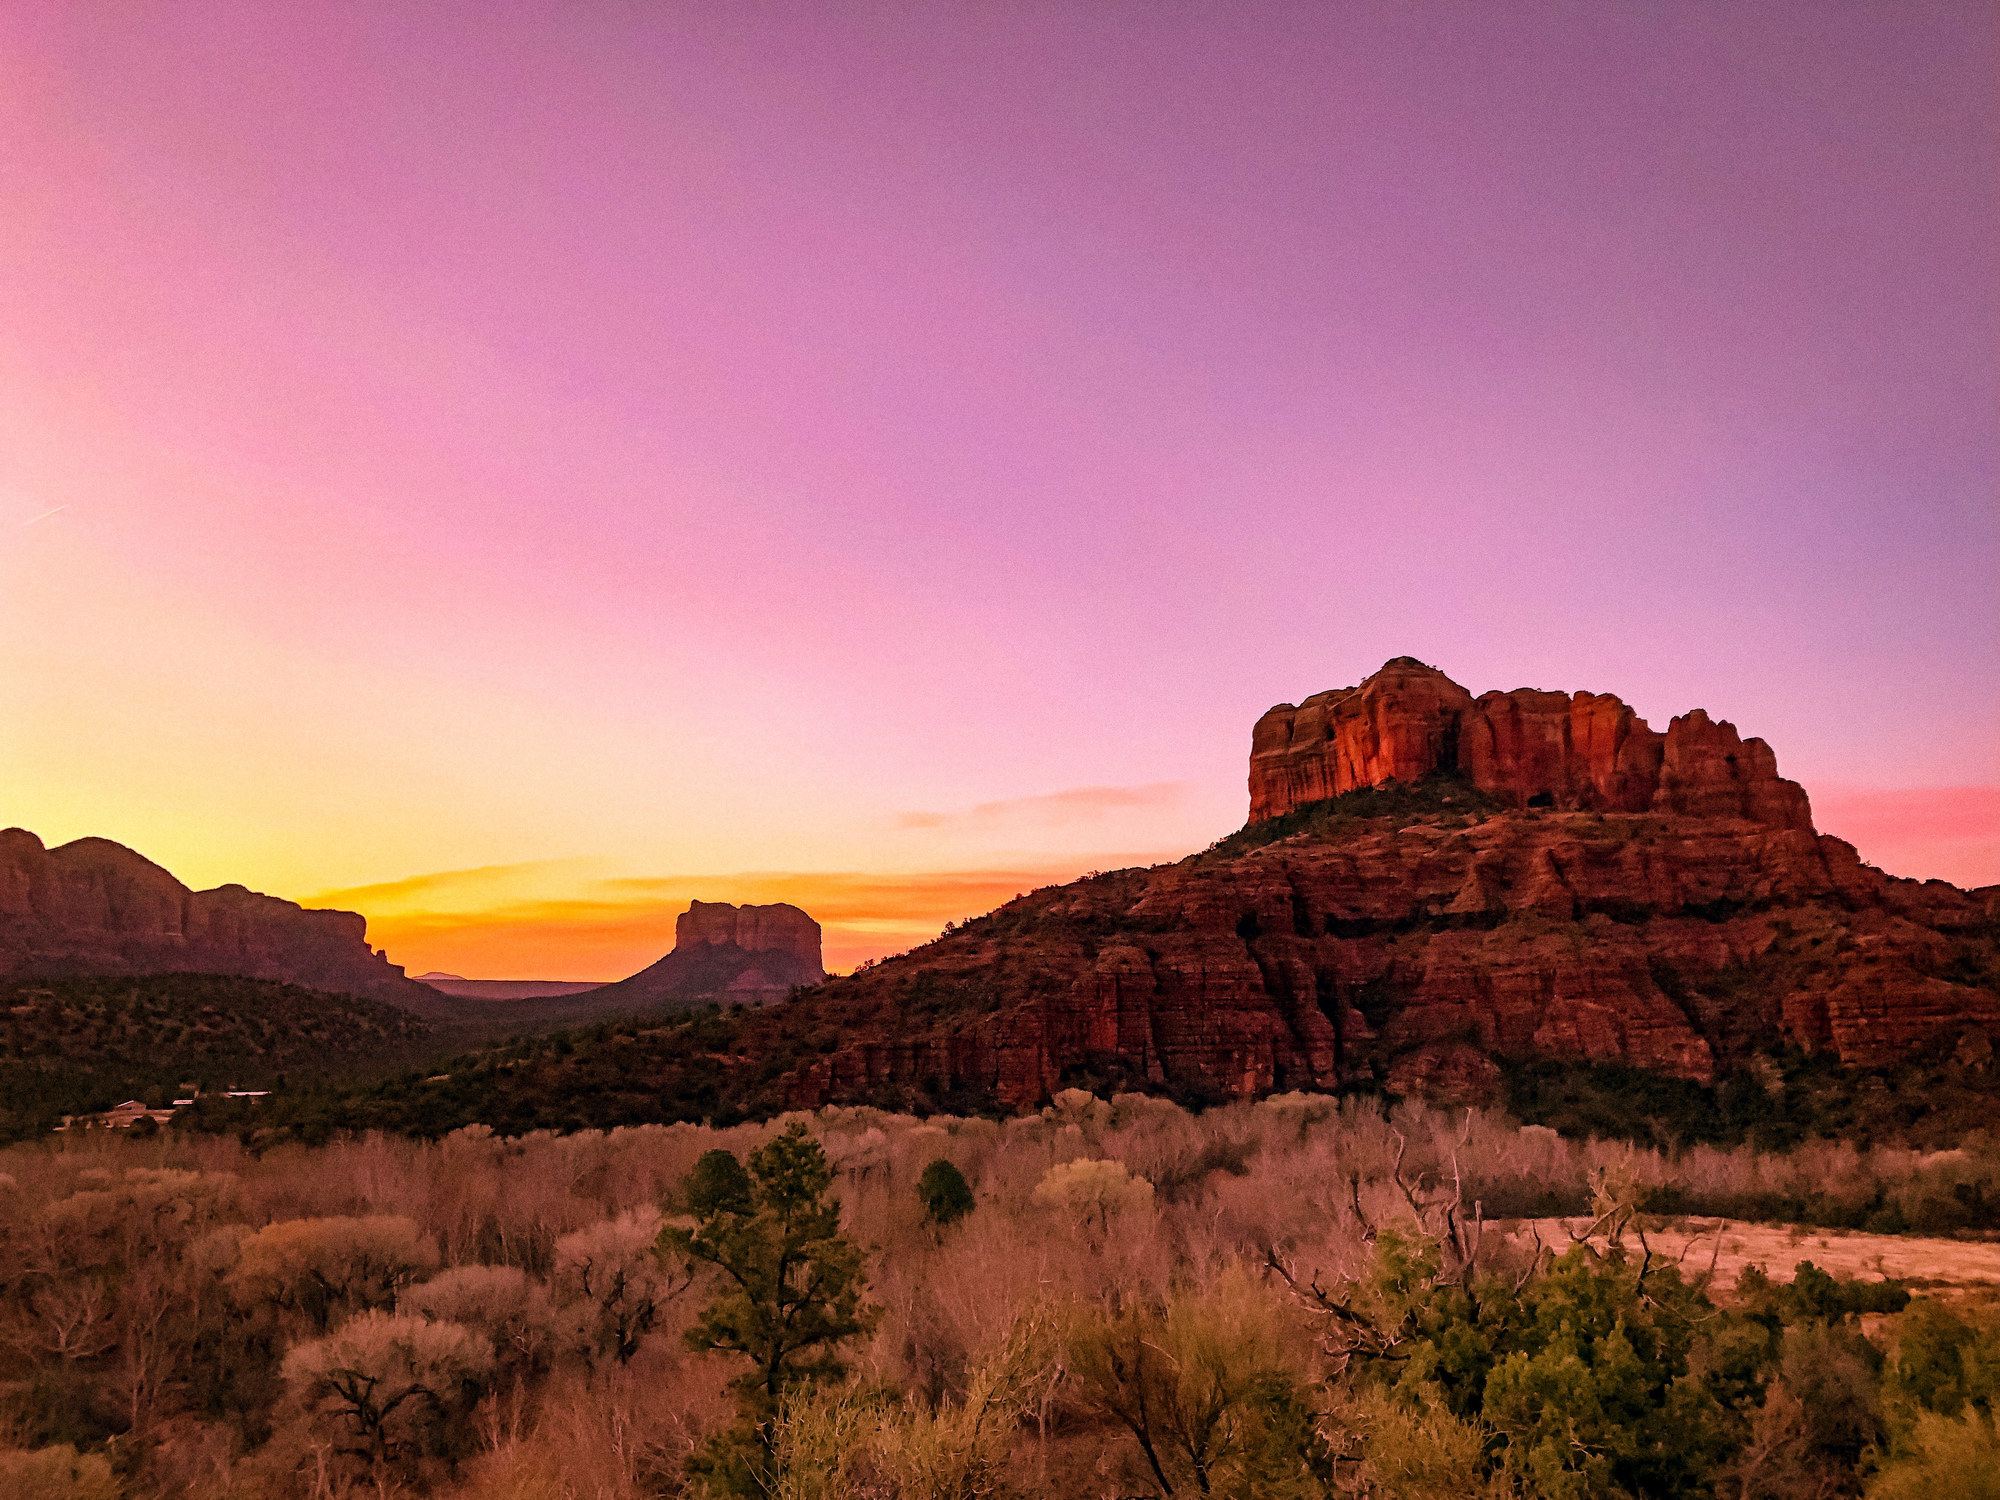 Red rock formations in Sedona at sunset